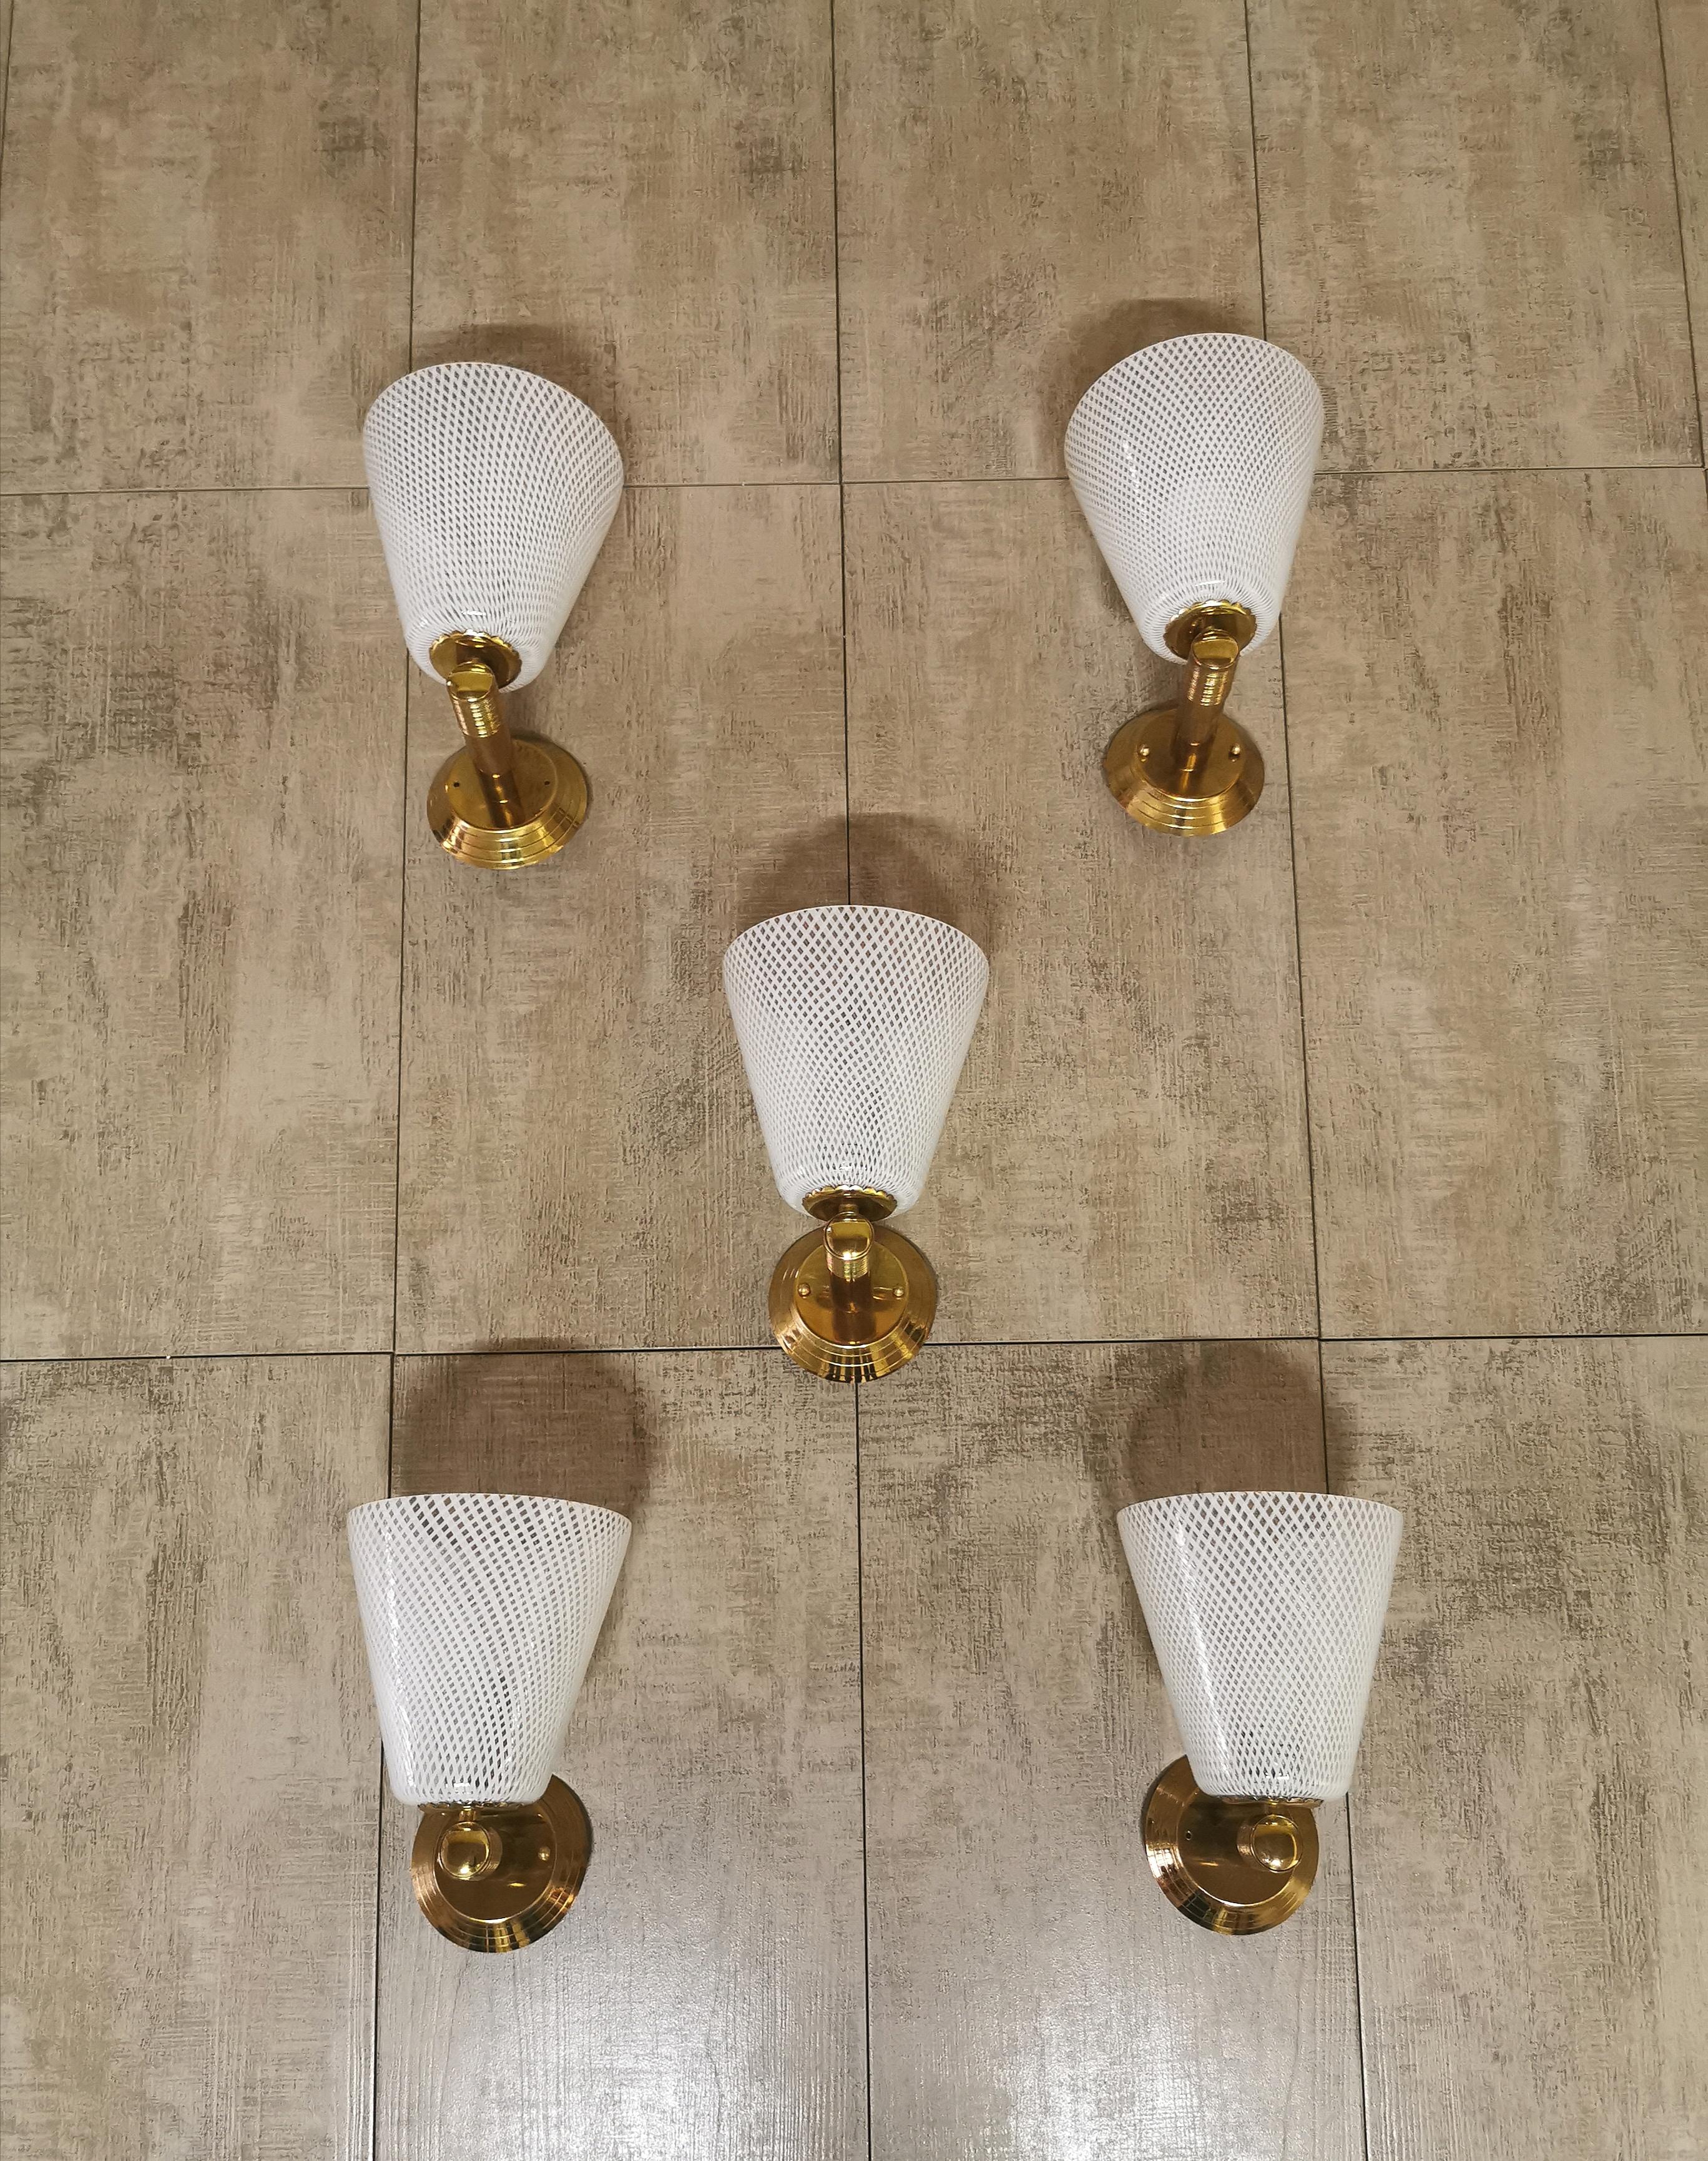 Set of 5 Wonderful and elegant Venini wall lamps with Murano glass diffusers with 